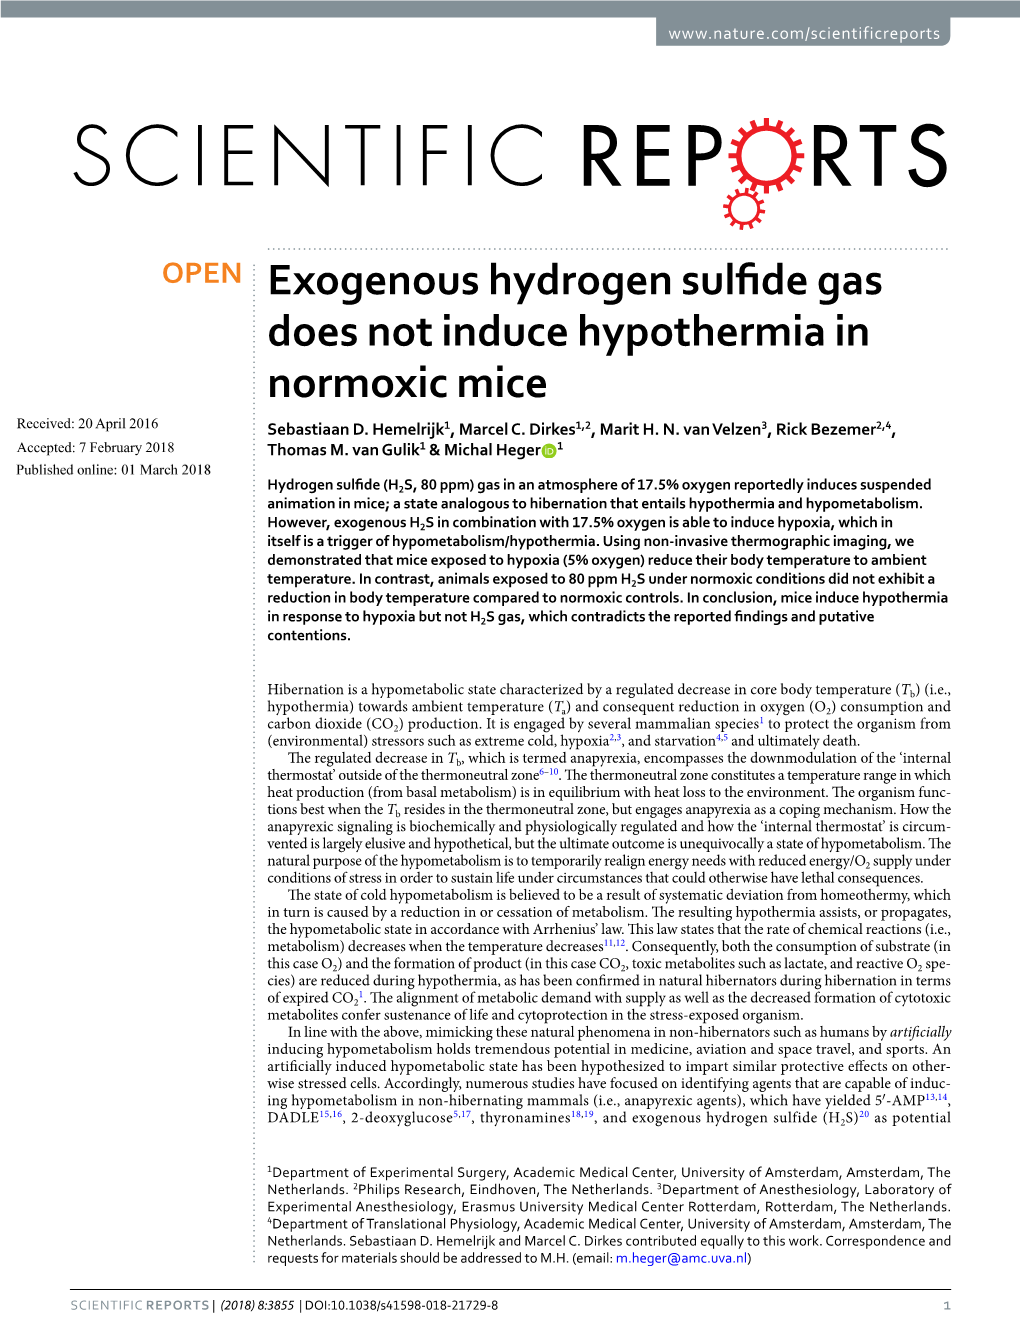 Exogenous Hydrogen Sulfide Gas Does Not Induce Hypothermia In